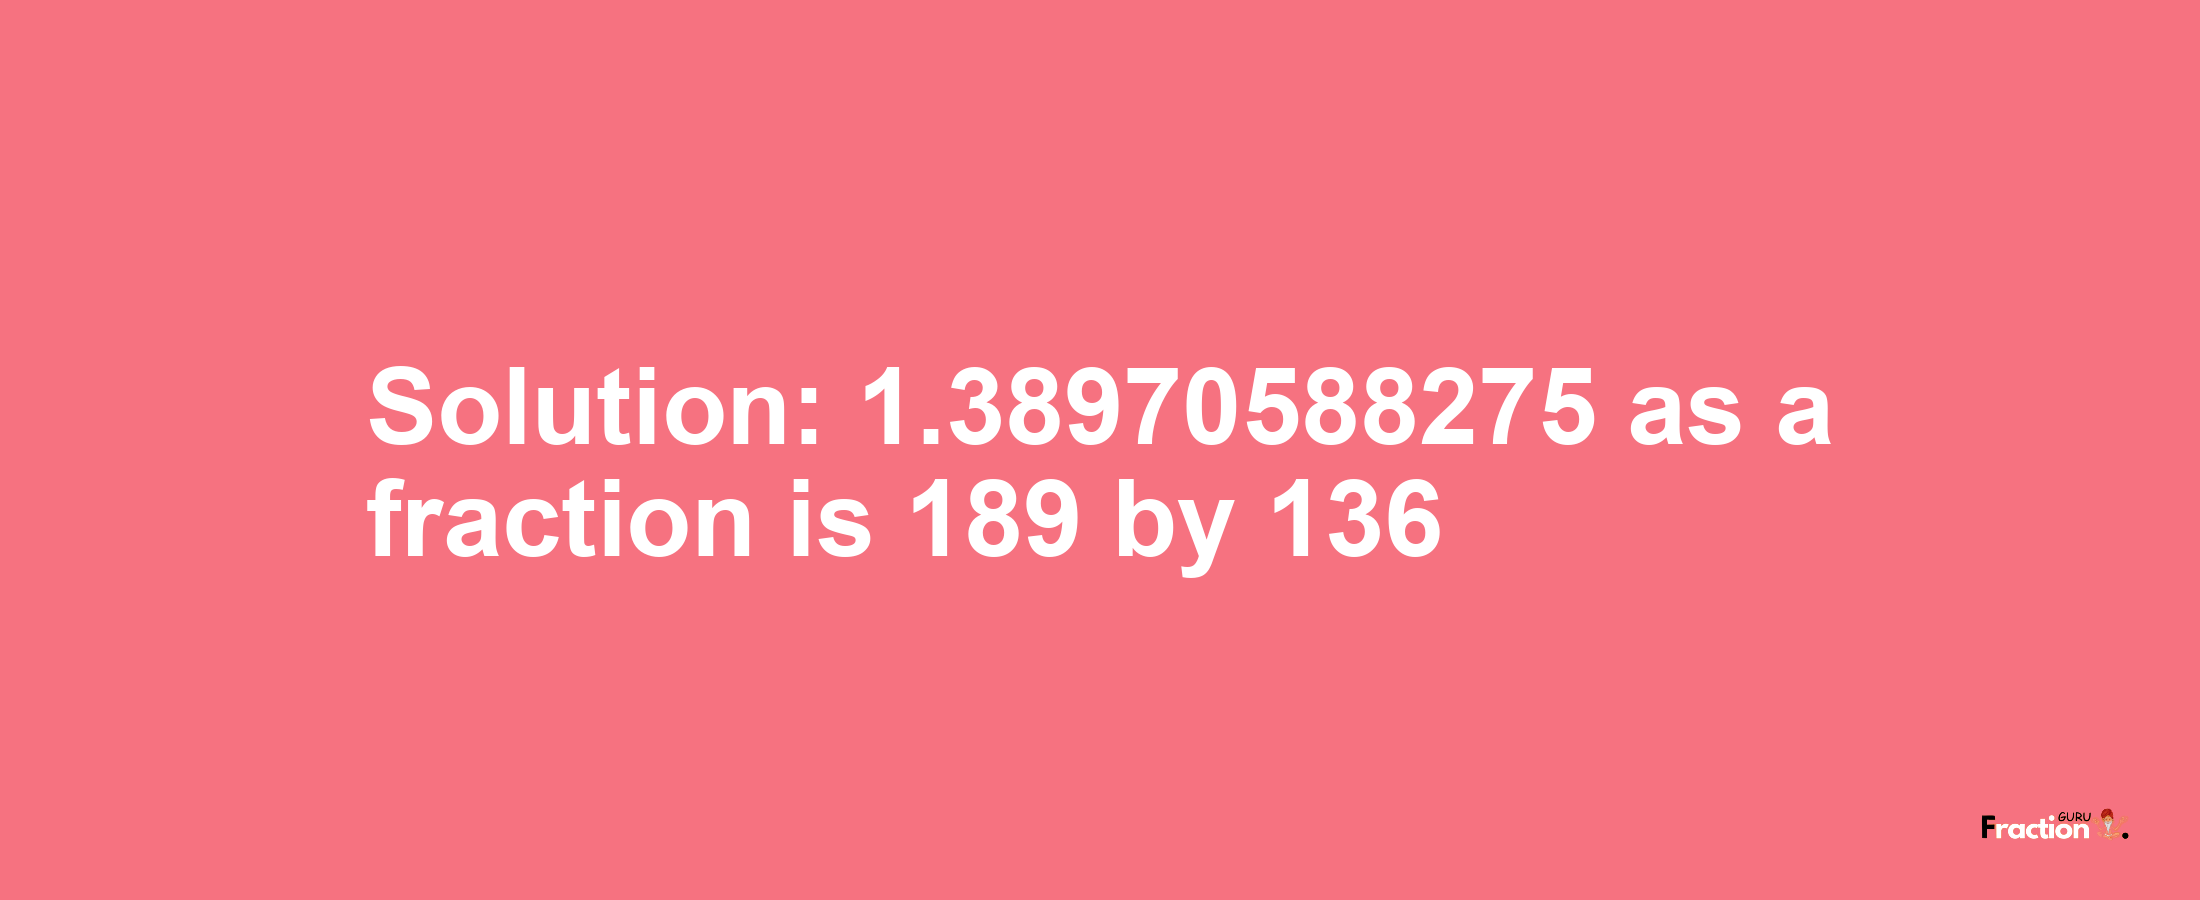 Solution:1.38970588275 as a fraction is 189/136